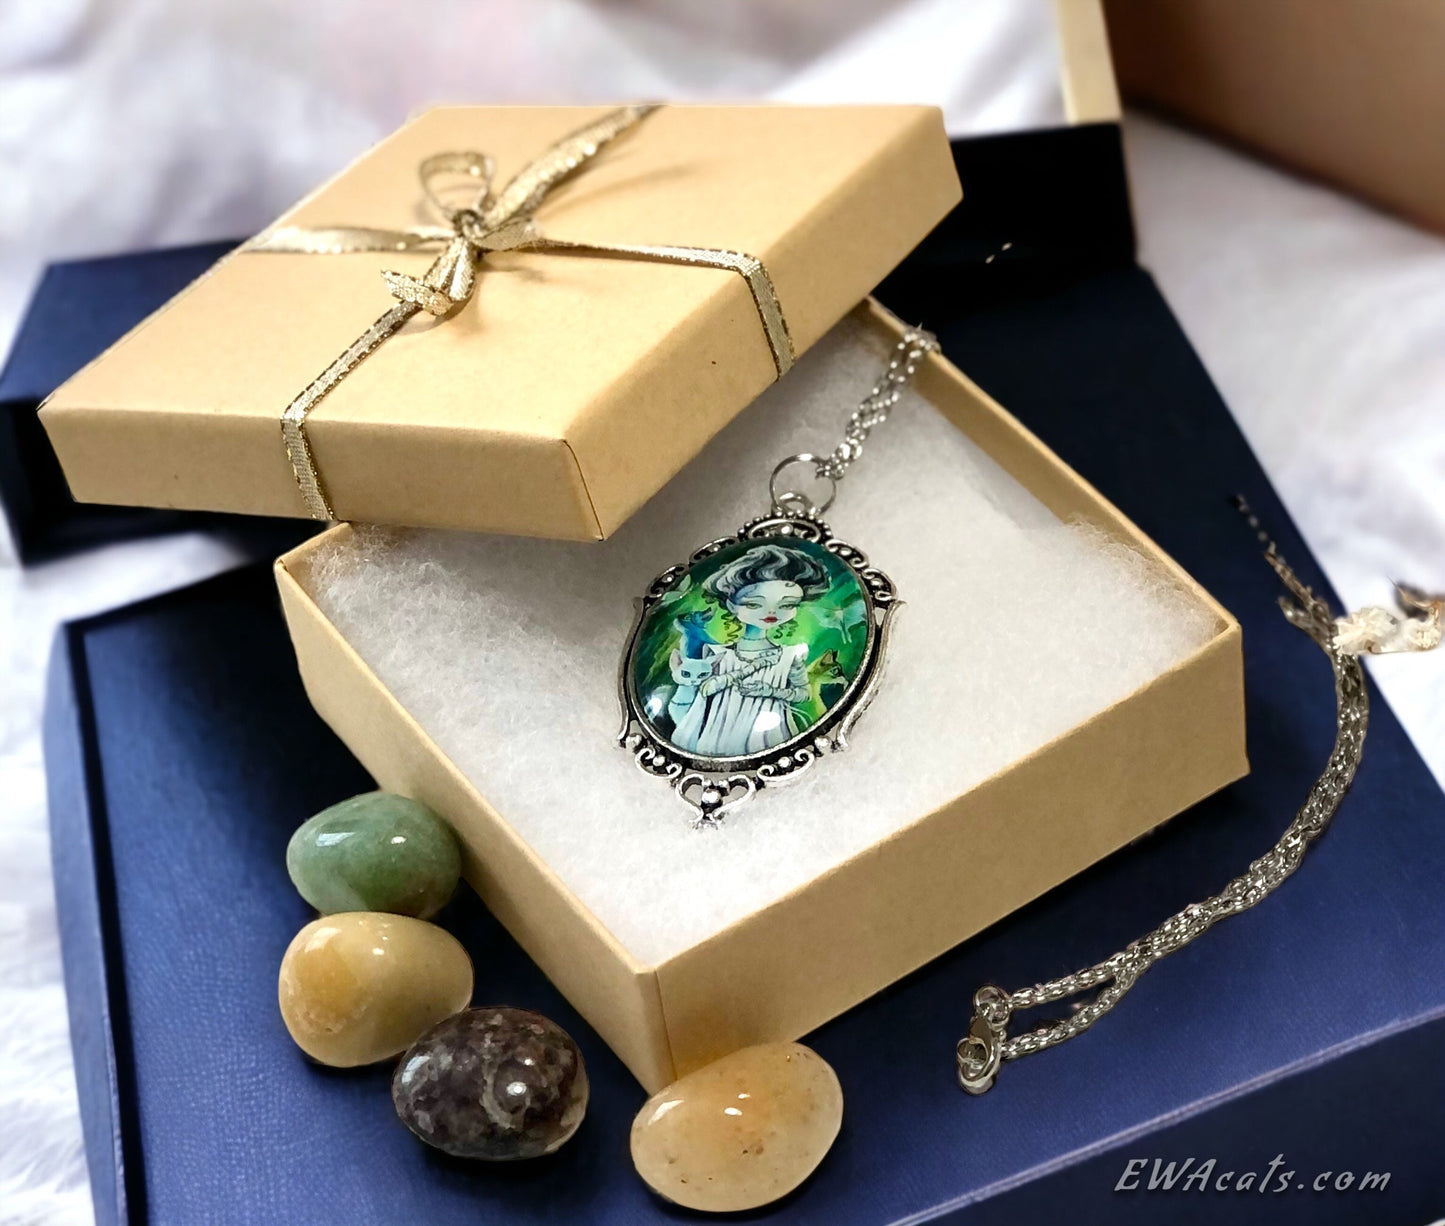 Necklace "Kitty Link"